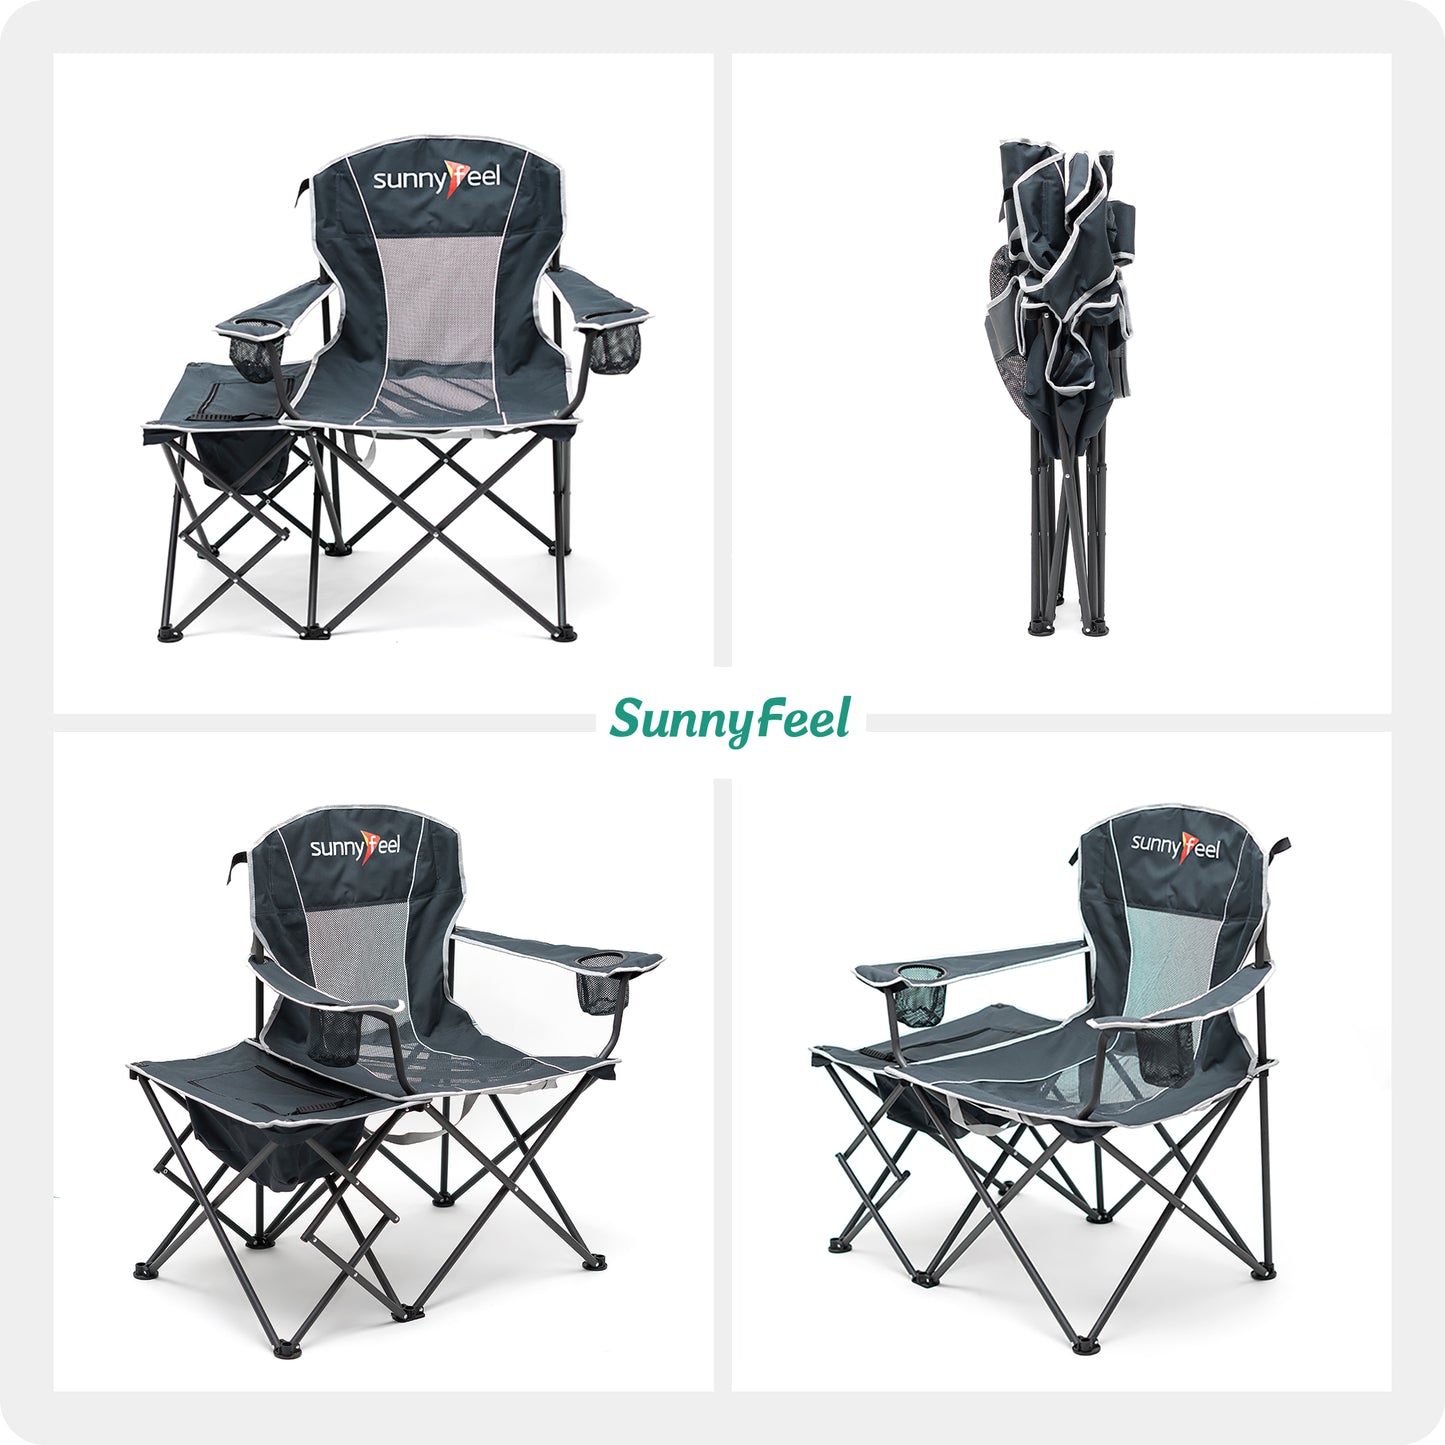 SUNNYFEEL XL Oversized Camping Chair with Cooler Bag, Side Table, Padded Portable Lawn Chair for Adults Heavy Duty 300 LBS, Folding Camp Quad Chair High Back with Cup Holder for Picnic,Beach,Sports